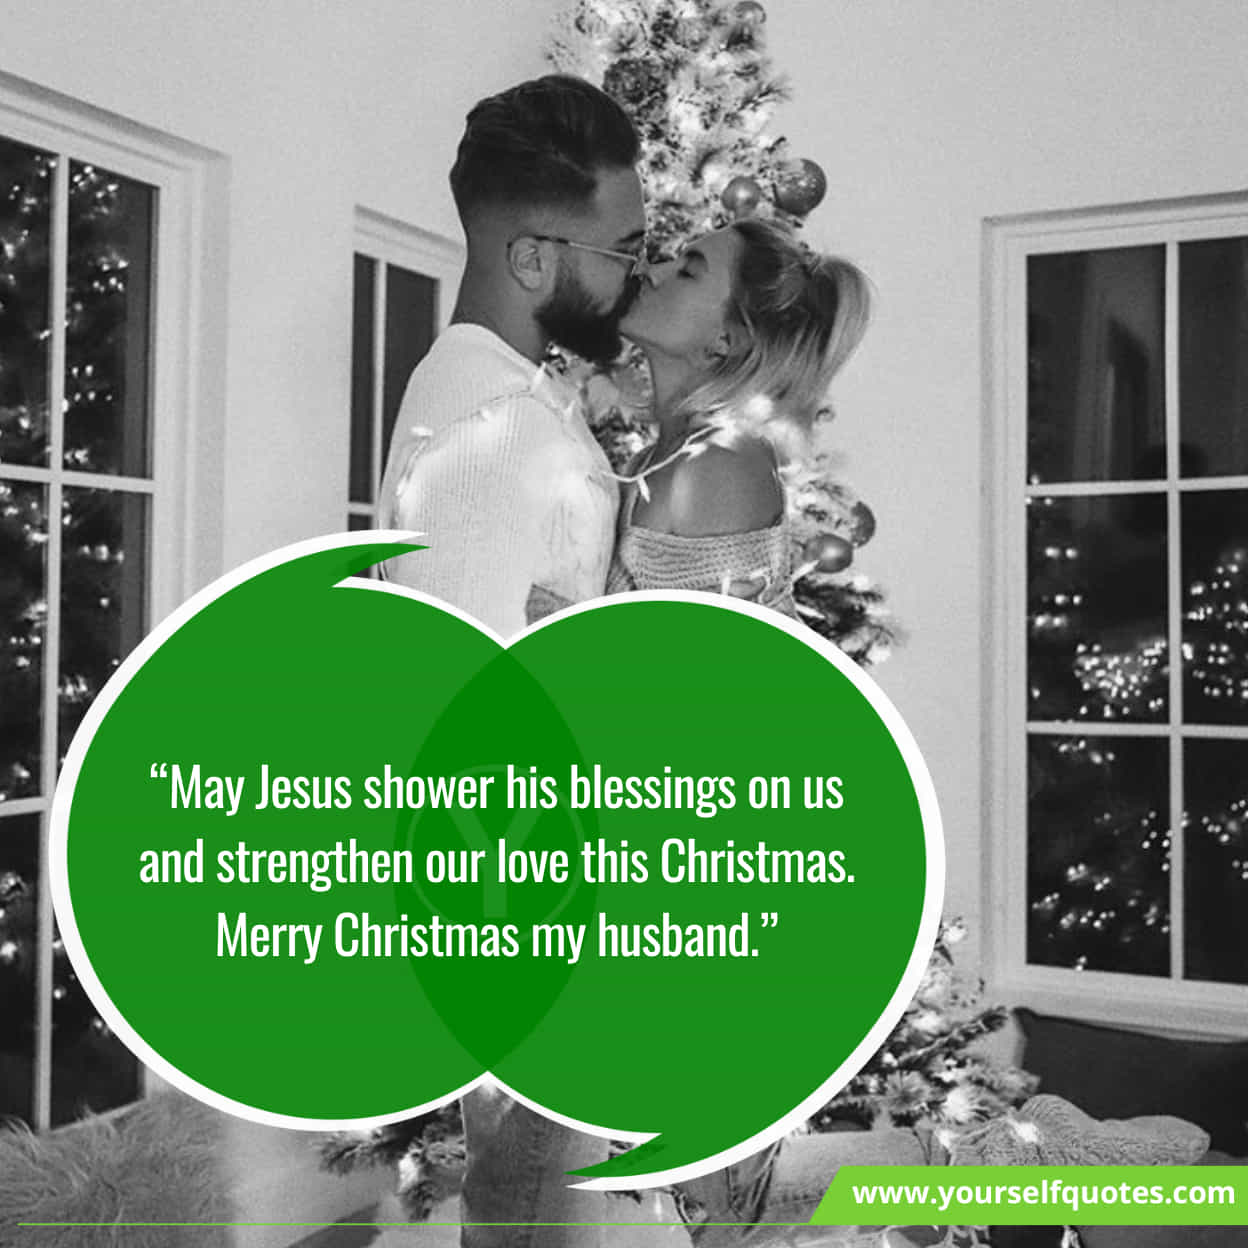 Romantic Christmas Wishes for Husband